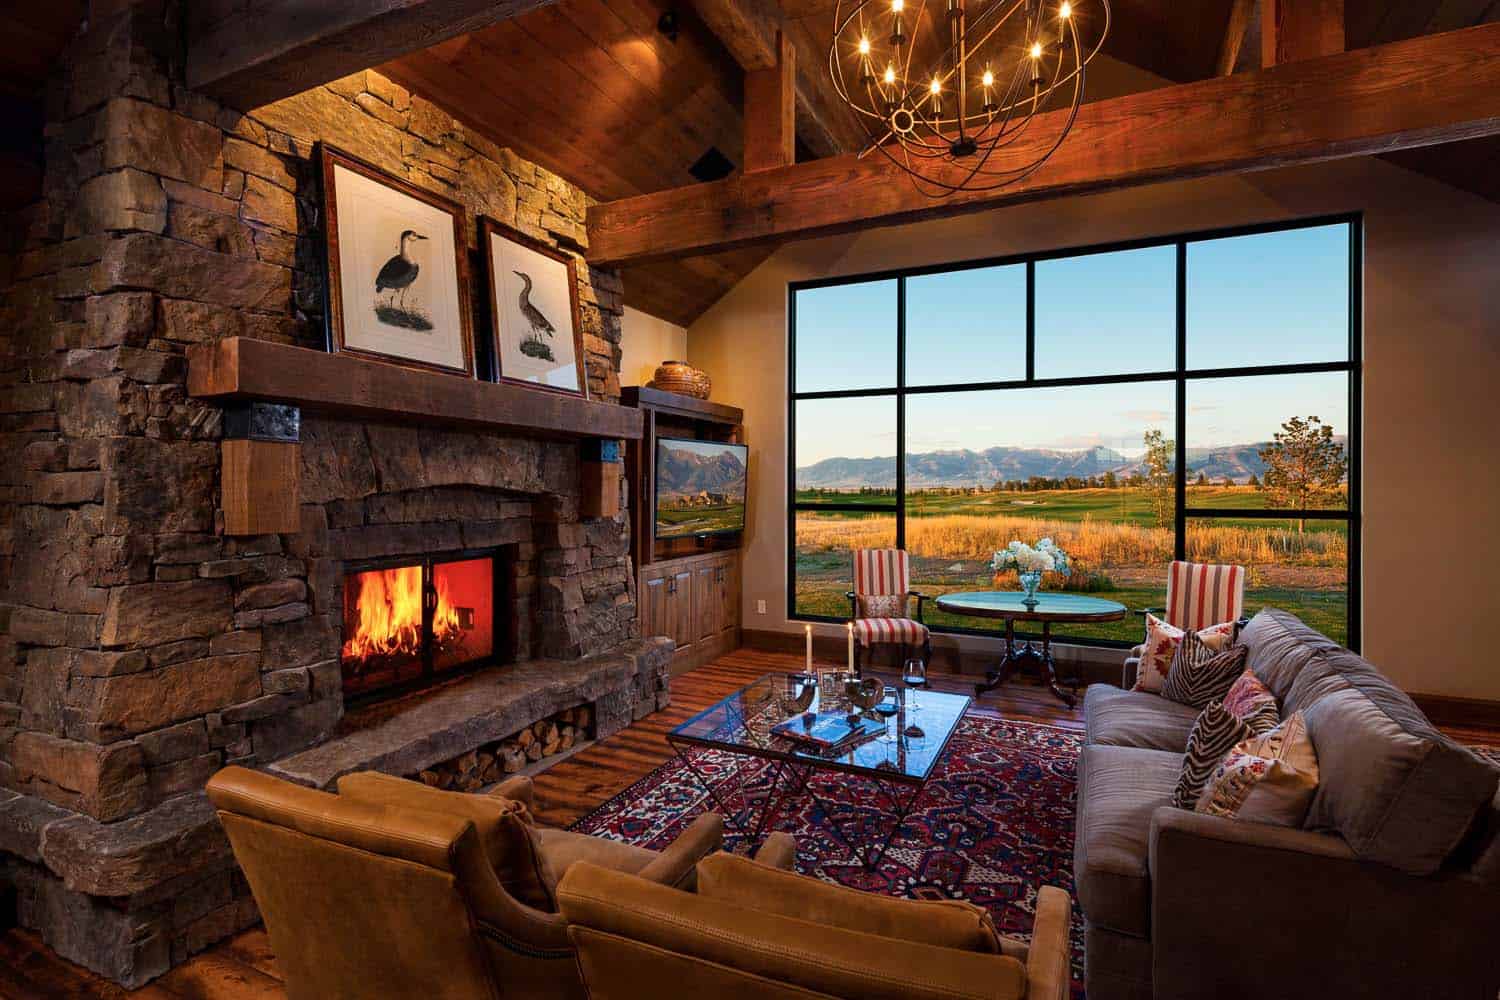 Striking mountain refuge in Montana: Traditional meets contemporary